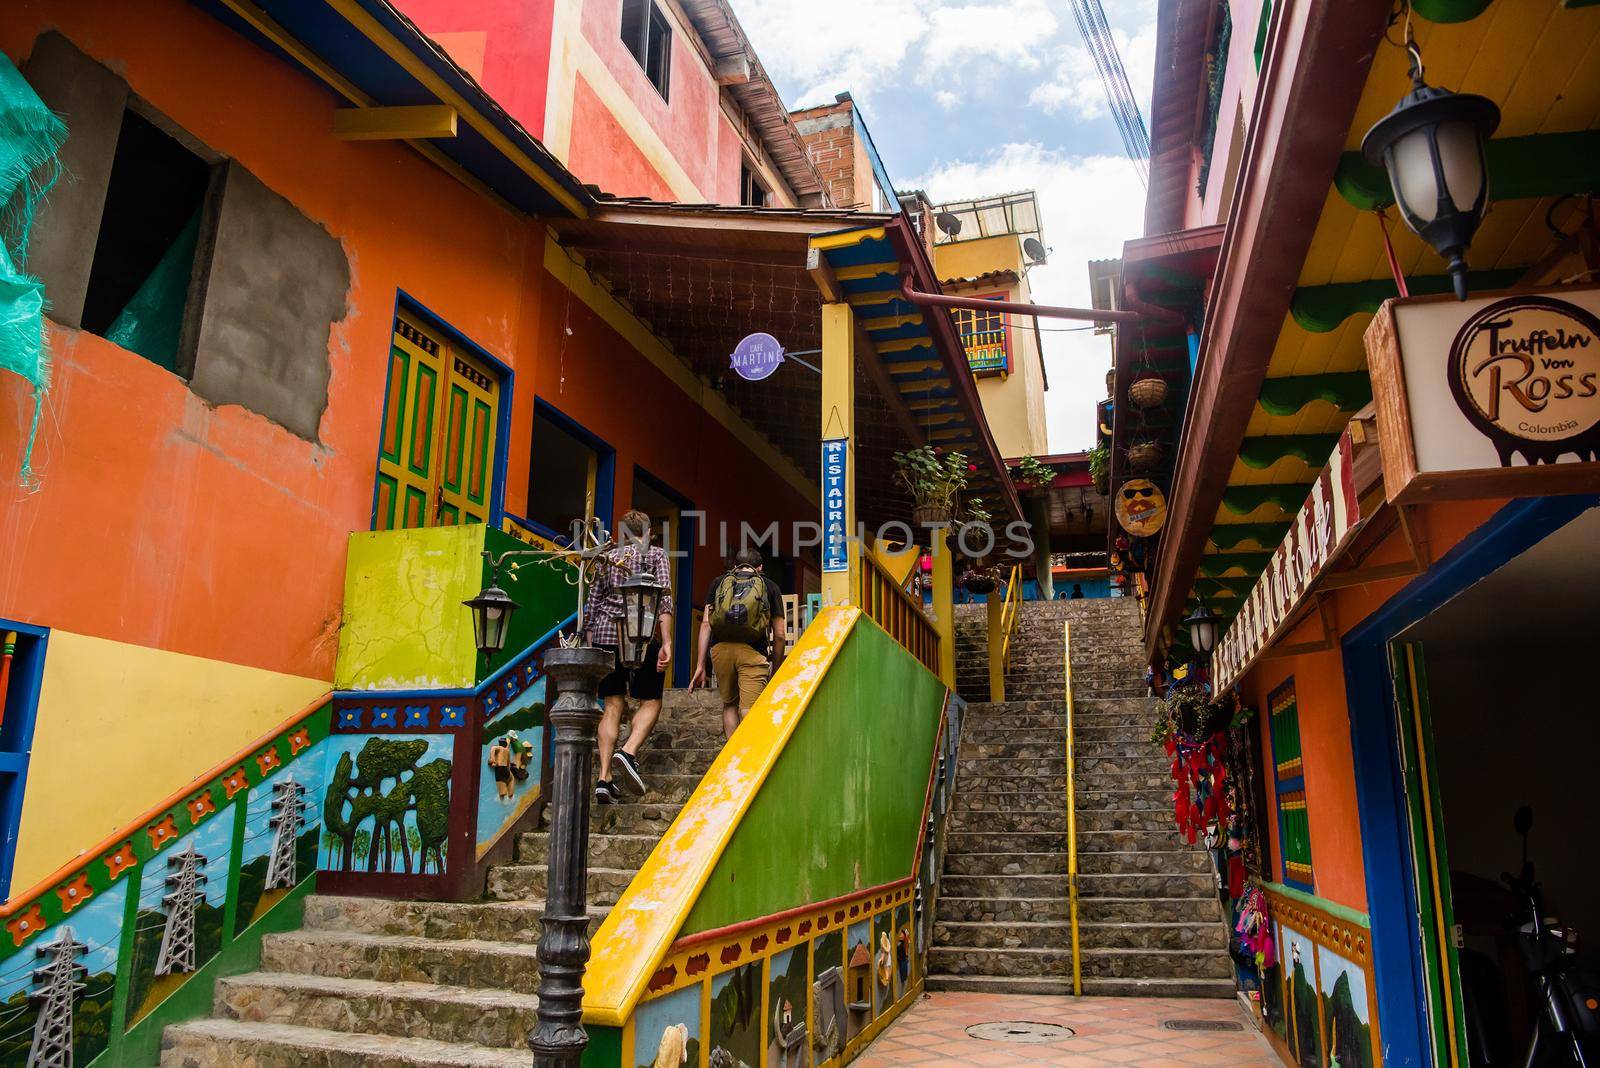 View of staircase in downtown Guatape, Colombia with colorful patterns on the buildings.